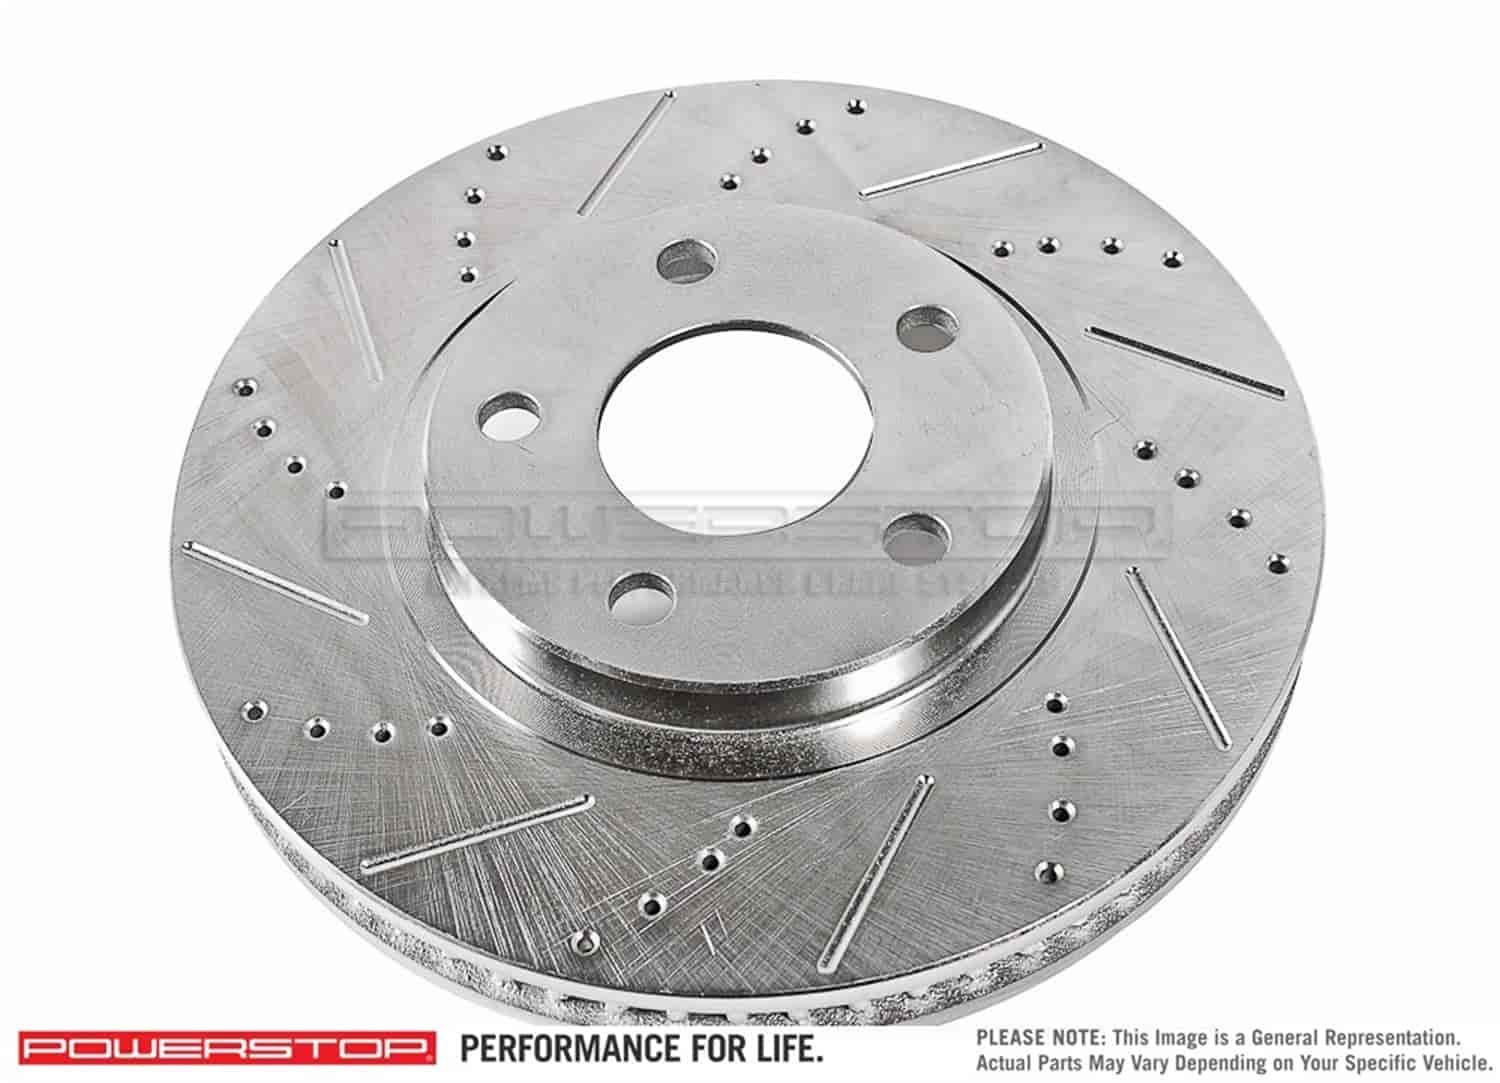 Extreme Performance Drilled and Slotted Front Brake Rotor Fits Select 2003-2008 Dodge Ram Models [Left/Driver Side]